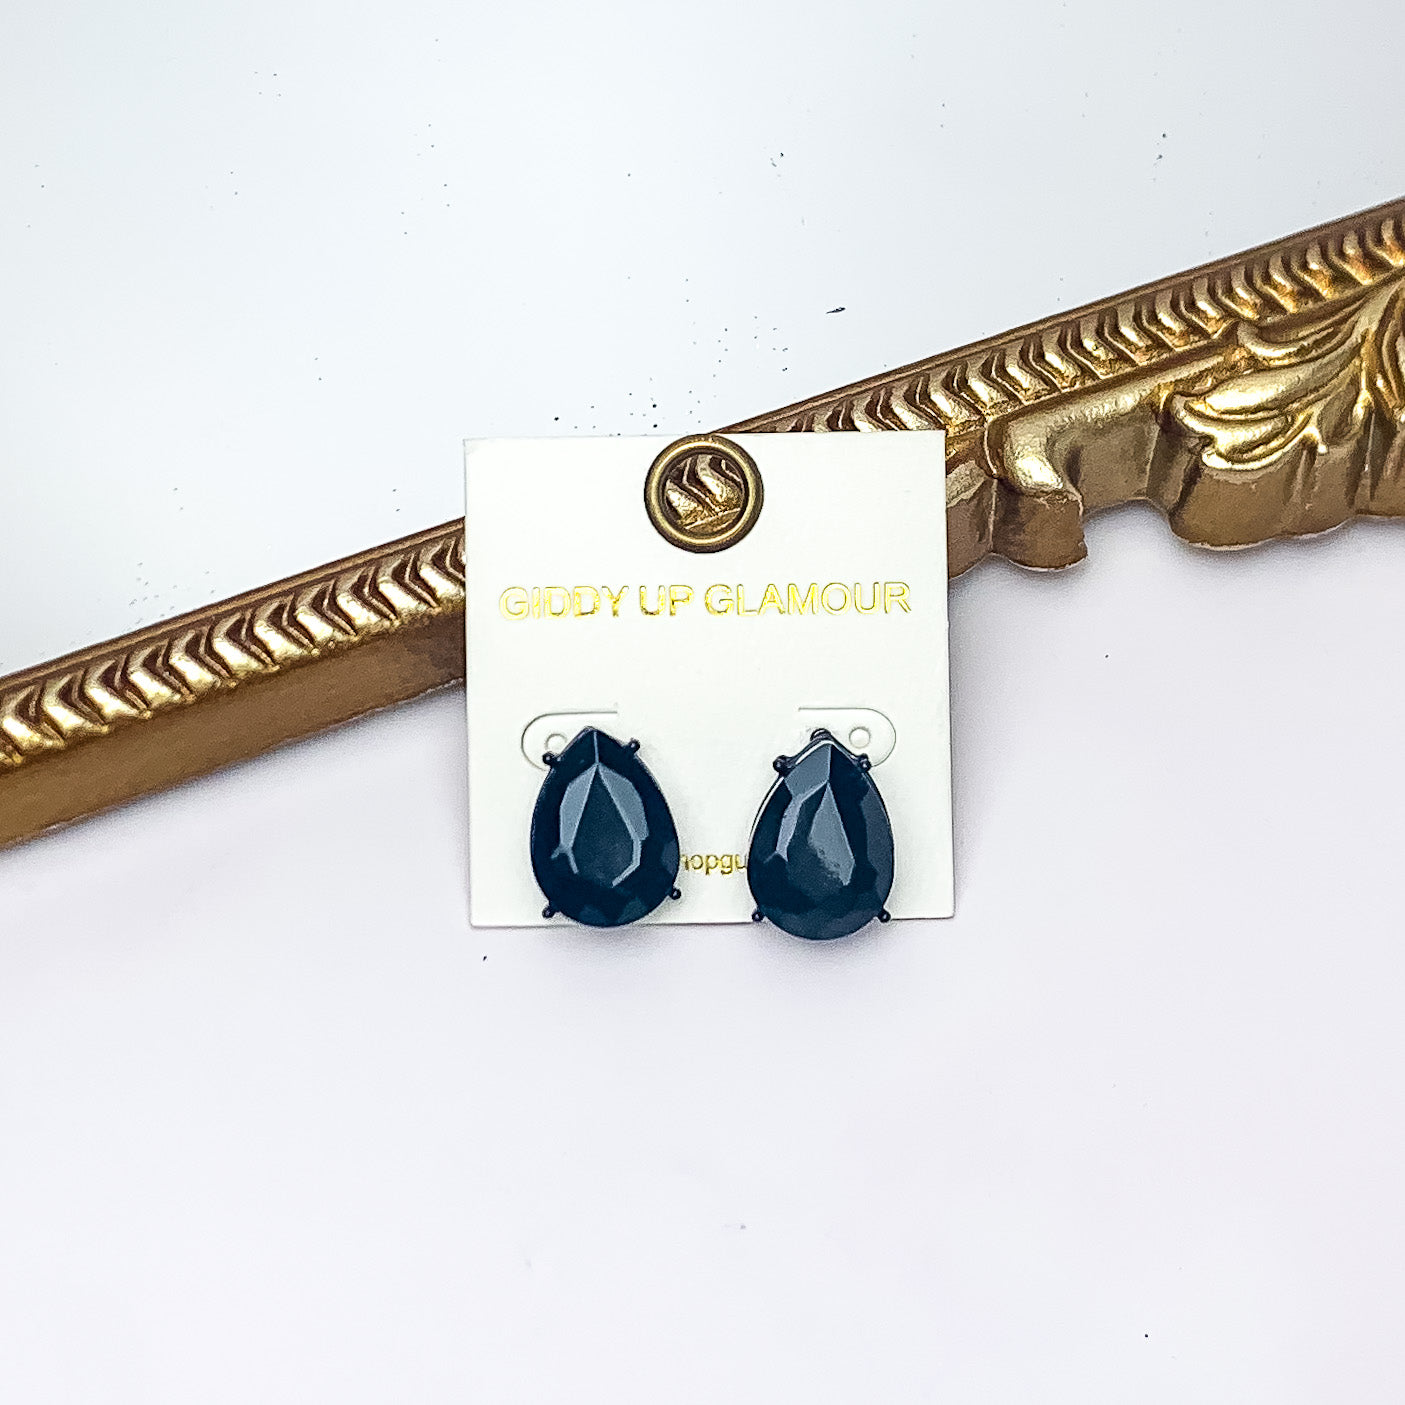 Teardrop Stud Earrings With Crystals in Black. Pictured on a white background with a gold frame behind the earrings.